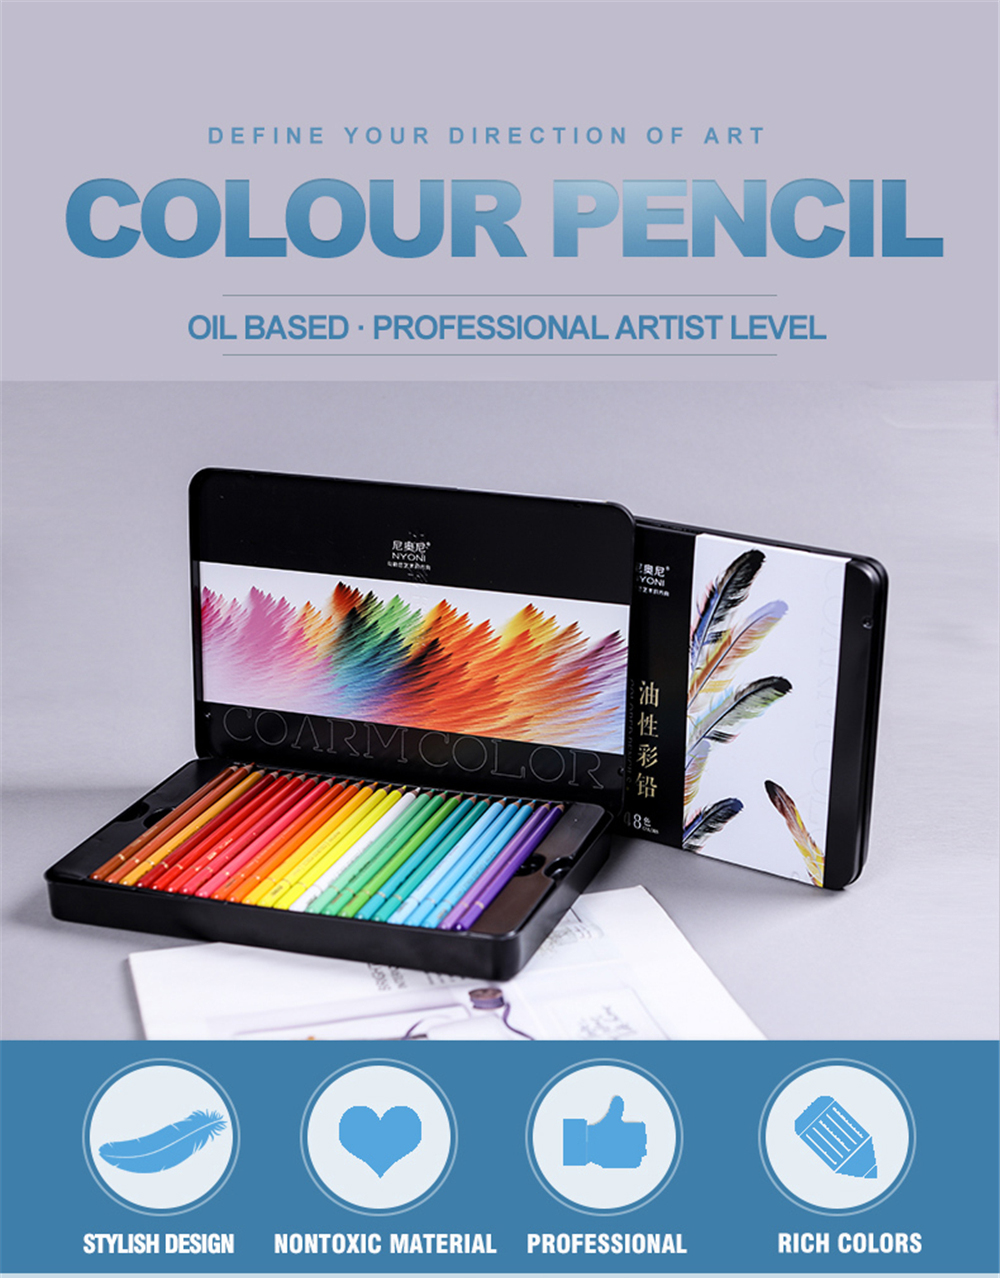 NYONI-364872120-Colors-Professional-Oil-Color-Pencil-Set-Hand-Painted-Sketching-Pen-Stationery-for-S-1803626-1